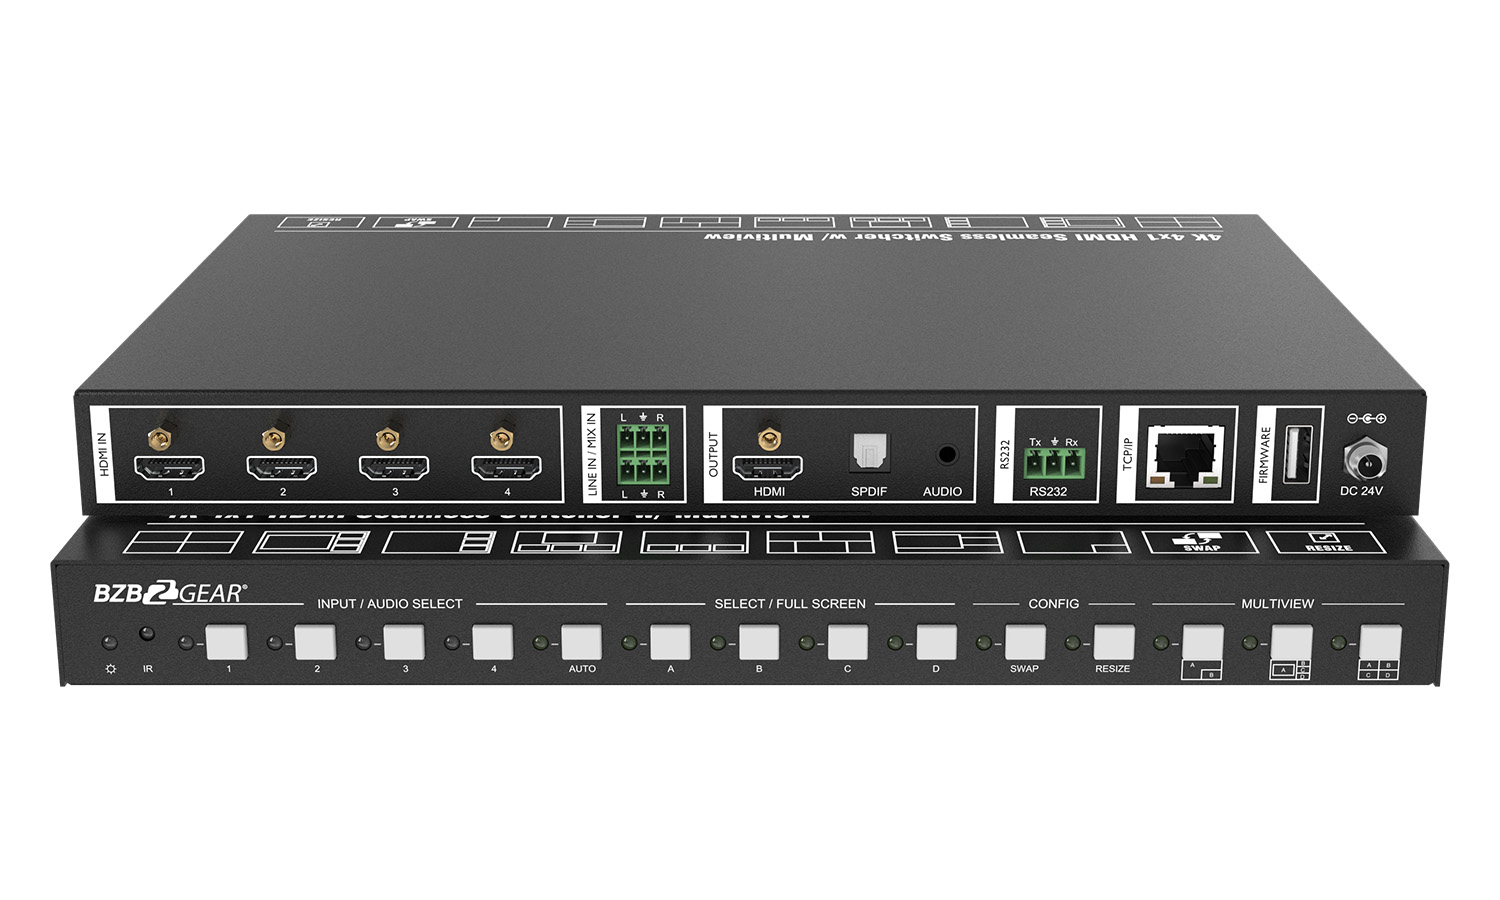 BG-UMV-HA41 4x1 4K UHD HDMI Seamless Switcher Scaler and MultiViewer with IP/RS232 Control and Audio De-embedding by BZBGEAR